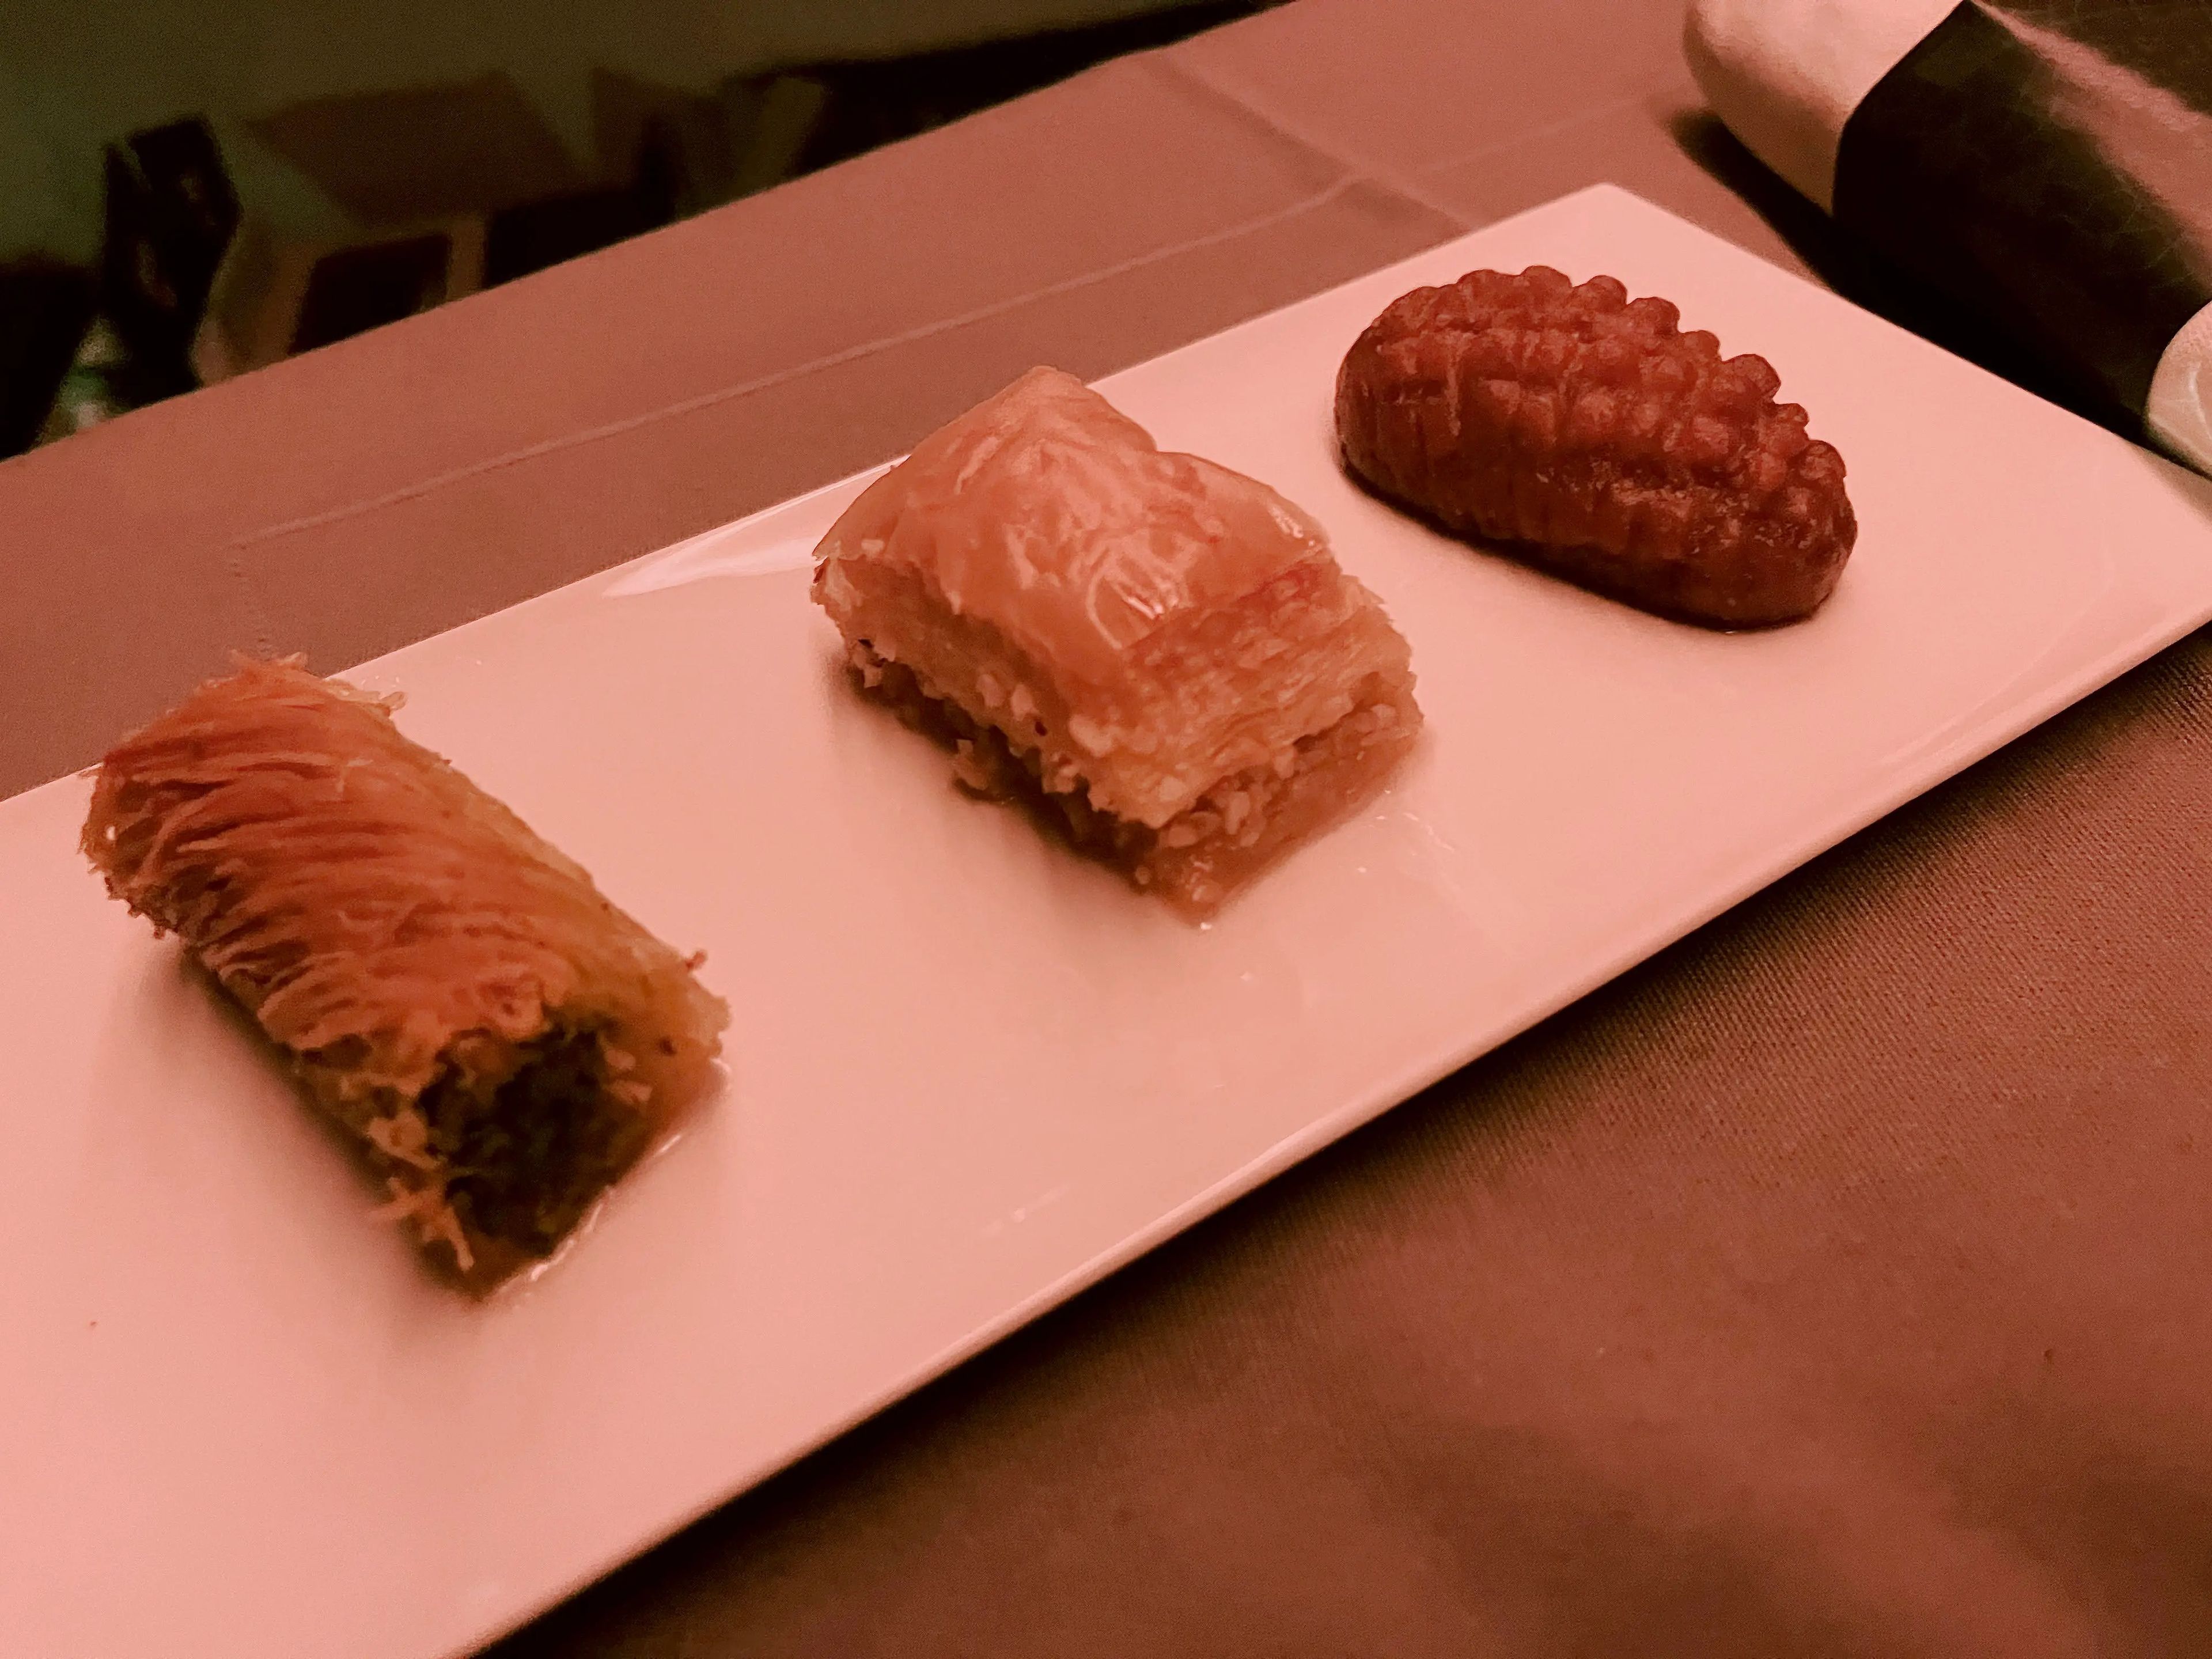 Pistachio kadayif (a cigar-rolled pastry), traditional baklava, and şekerpare (a fritter-shaped cake doused in syrup) lined up on a rectangular plate